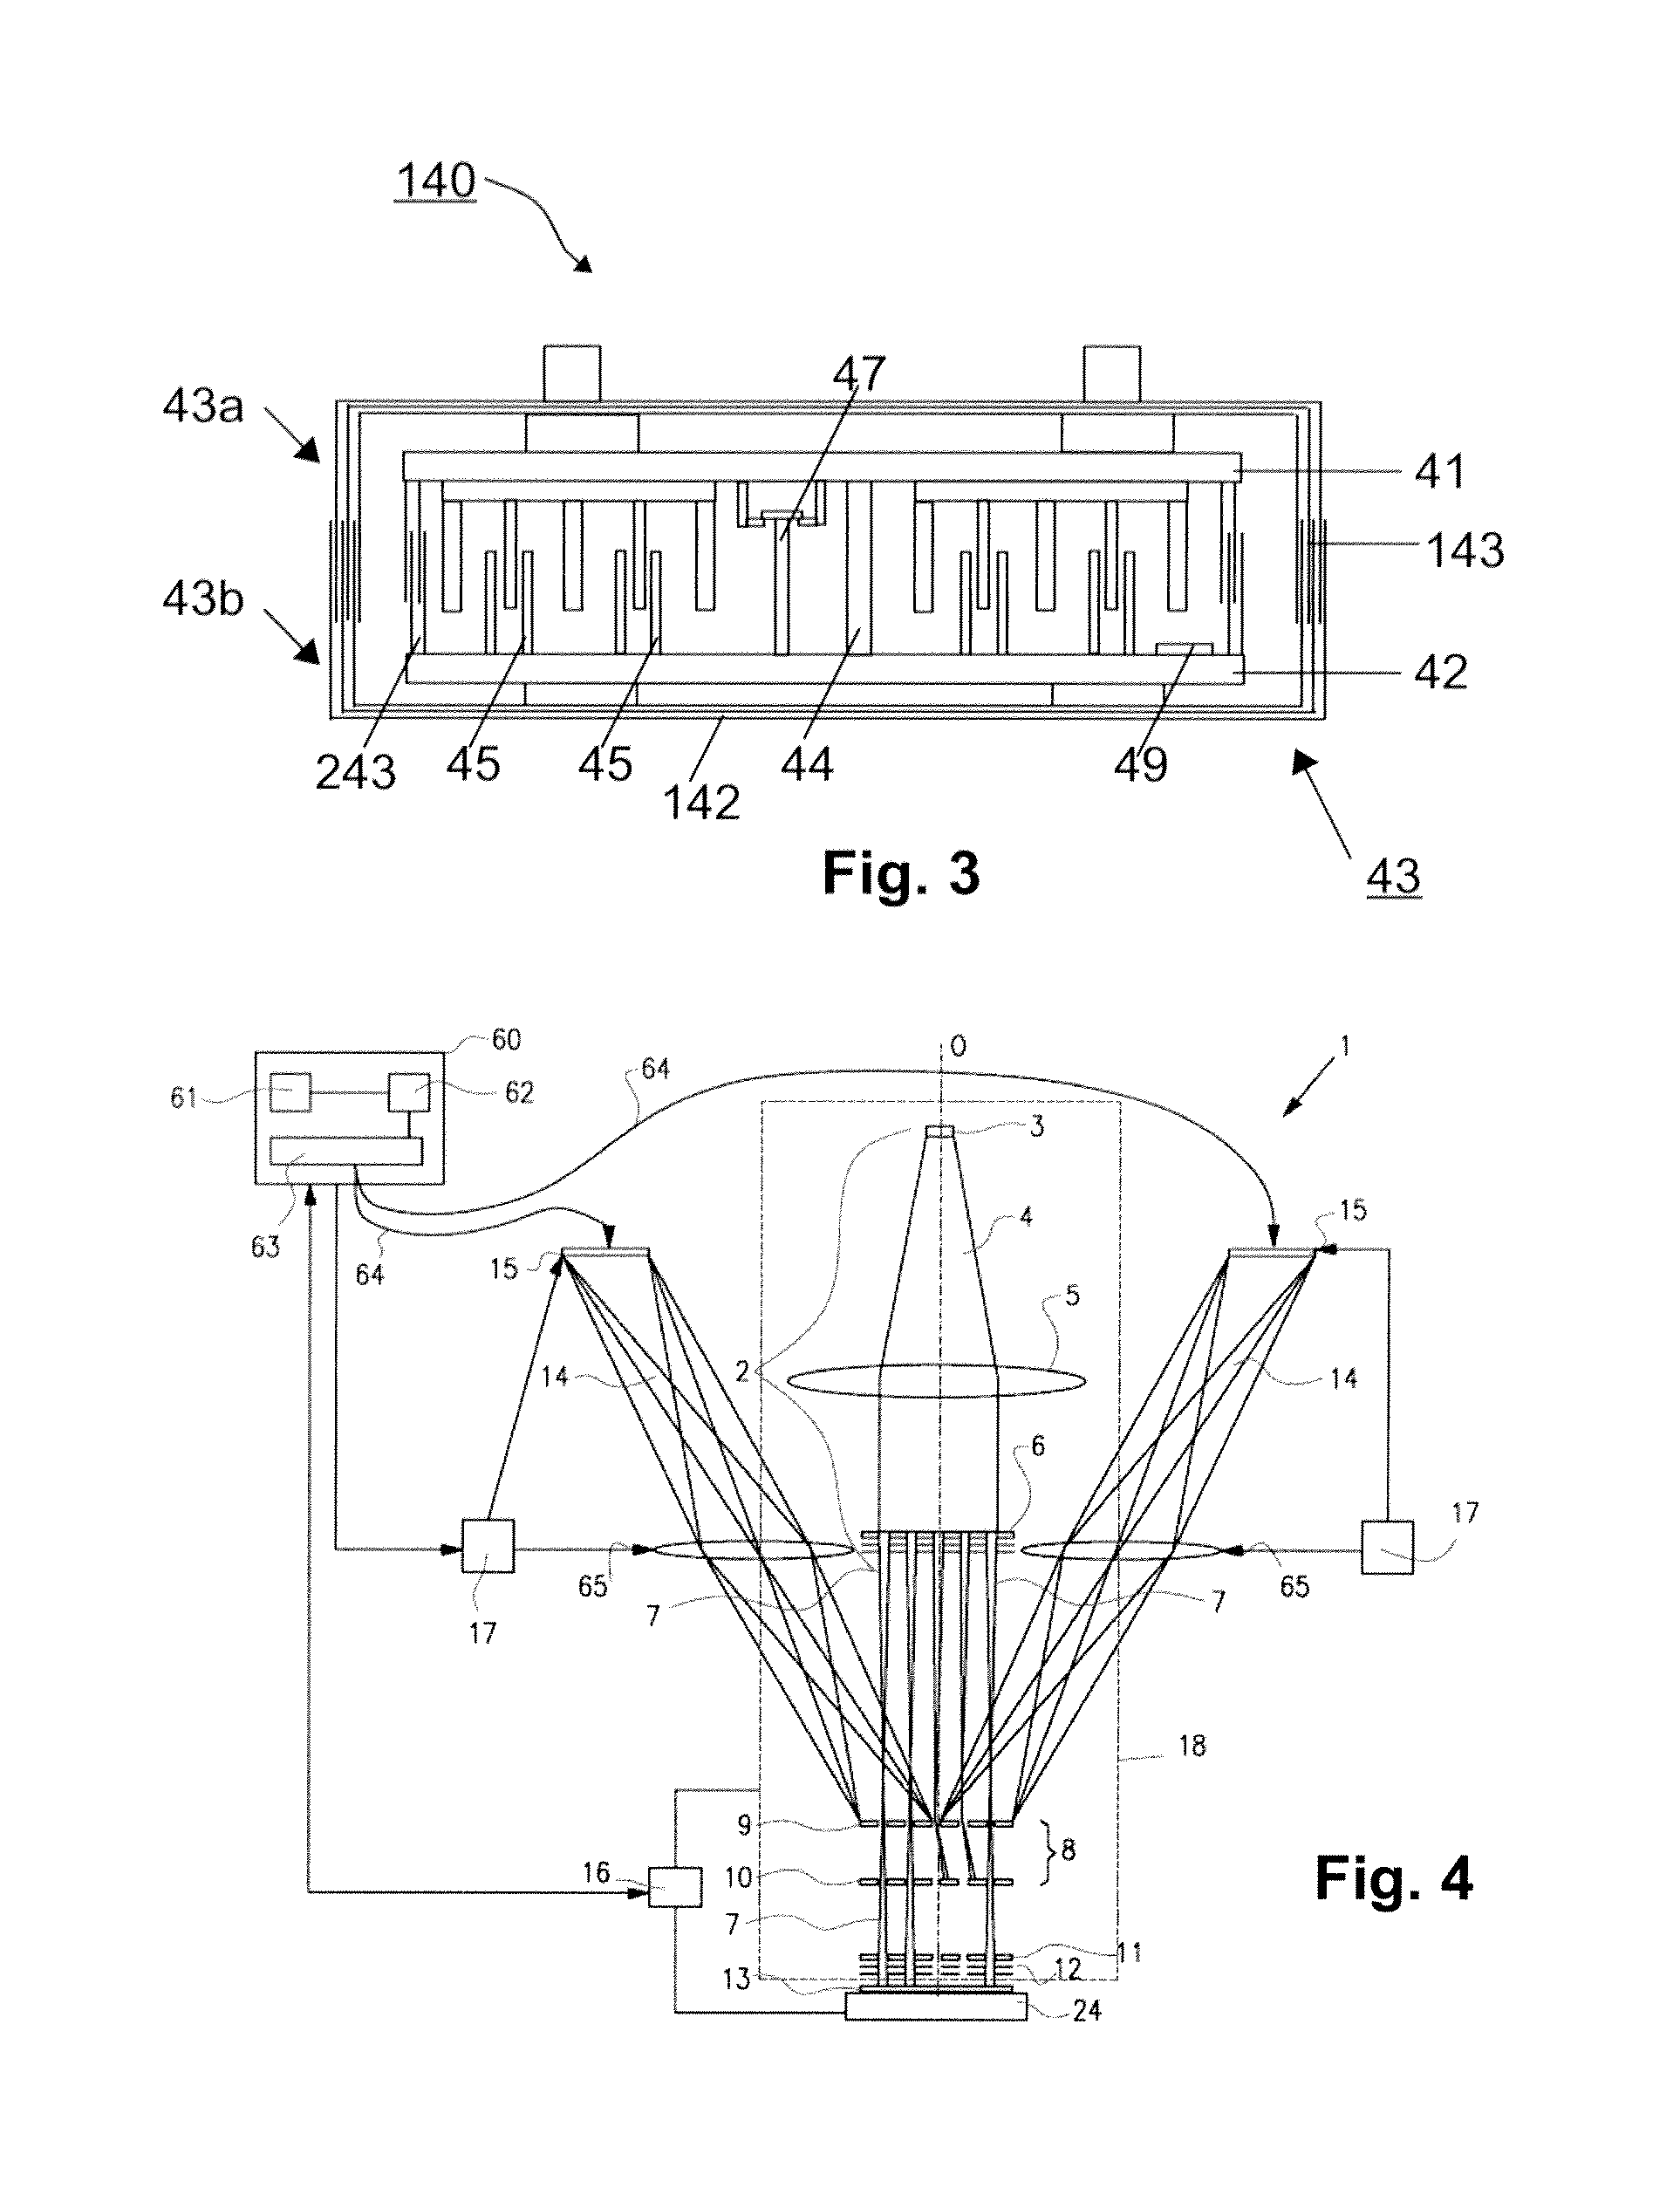 Support and positioning structure, semiconductor equipment system and method for positioning